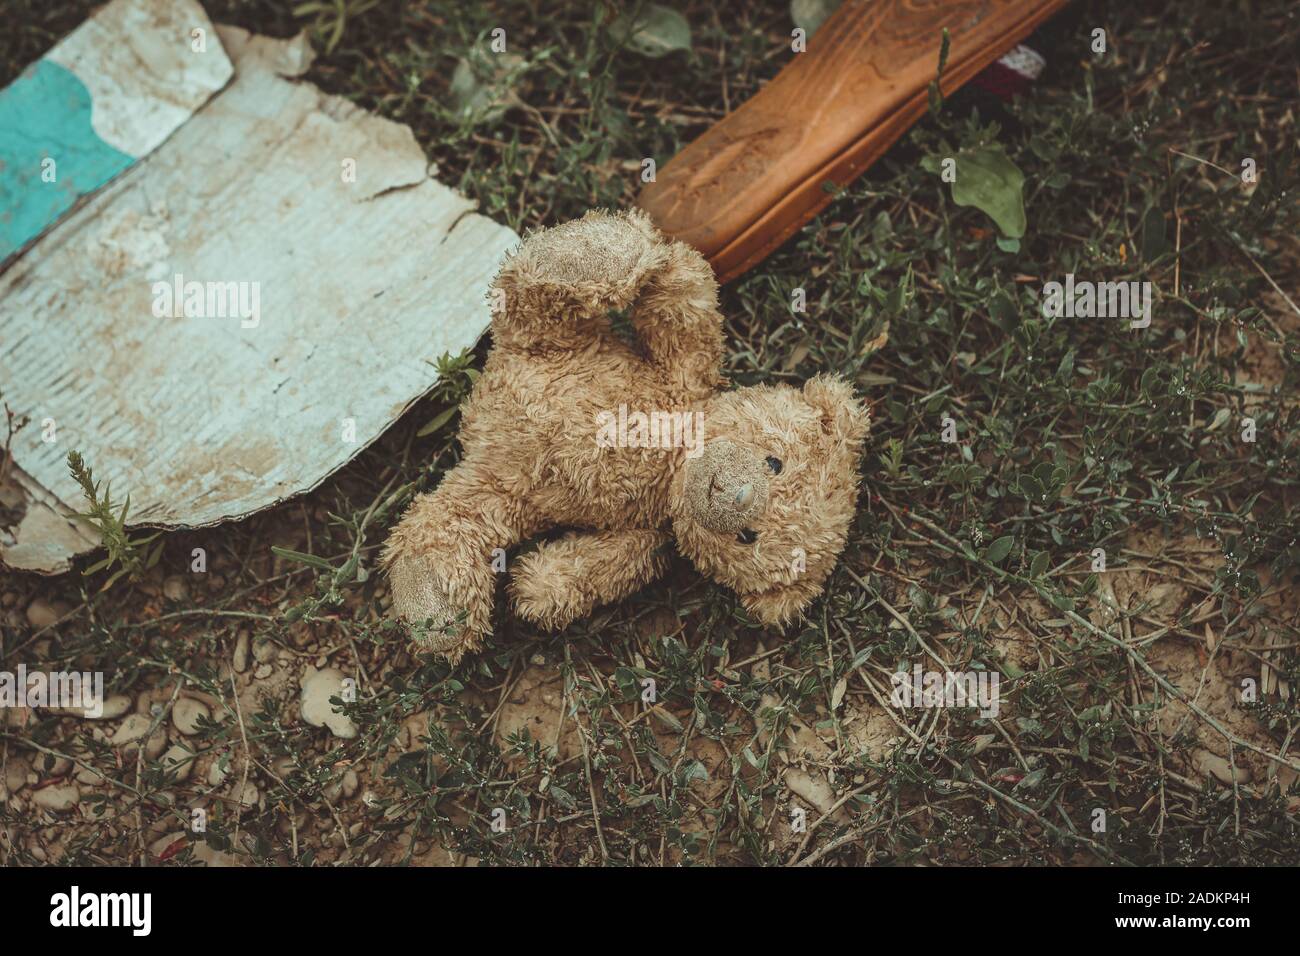 Old teddy bear laying on the dirty soil with other garbage Stock Photo